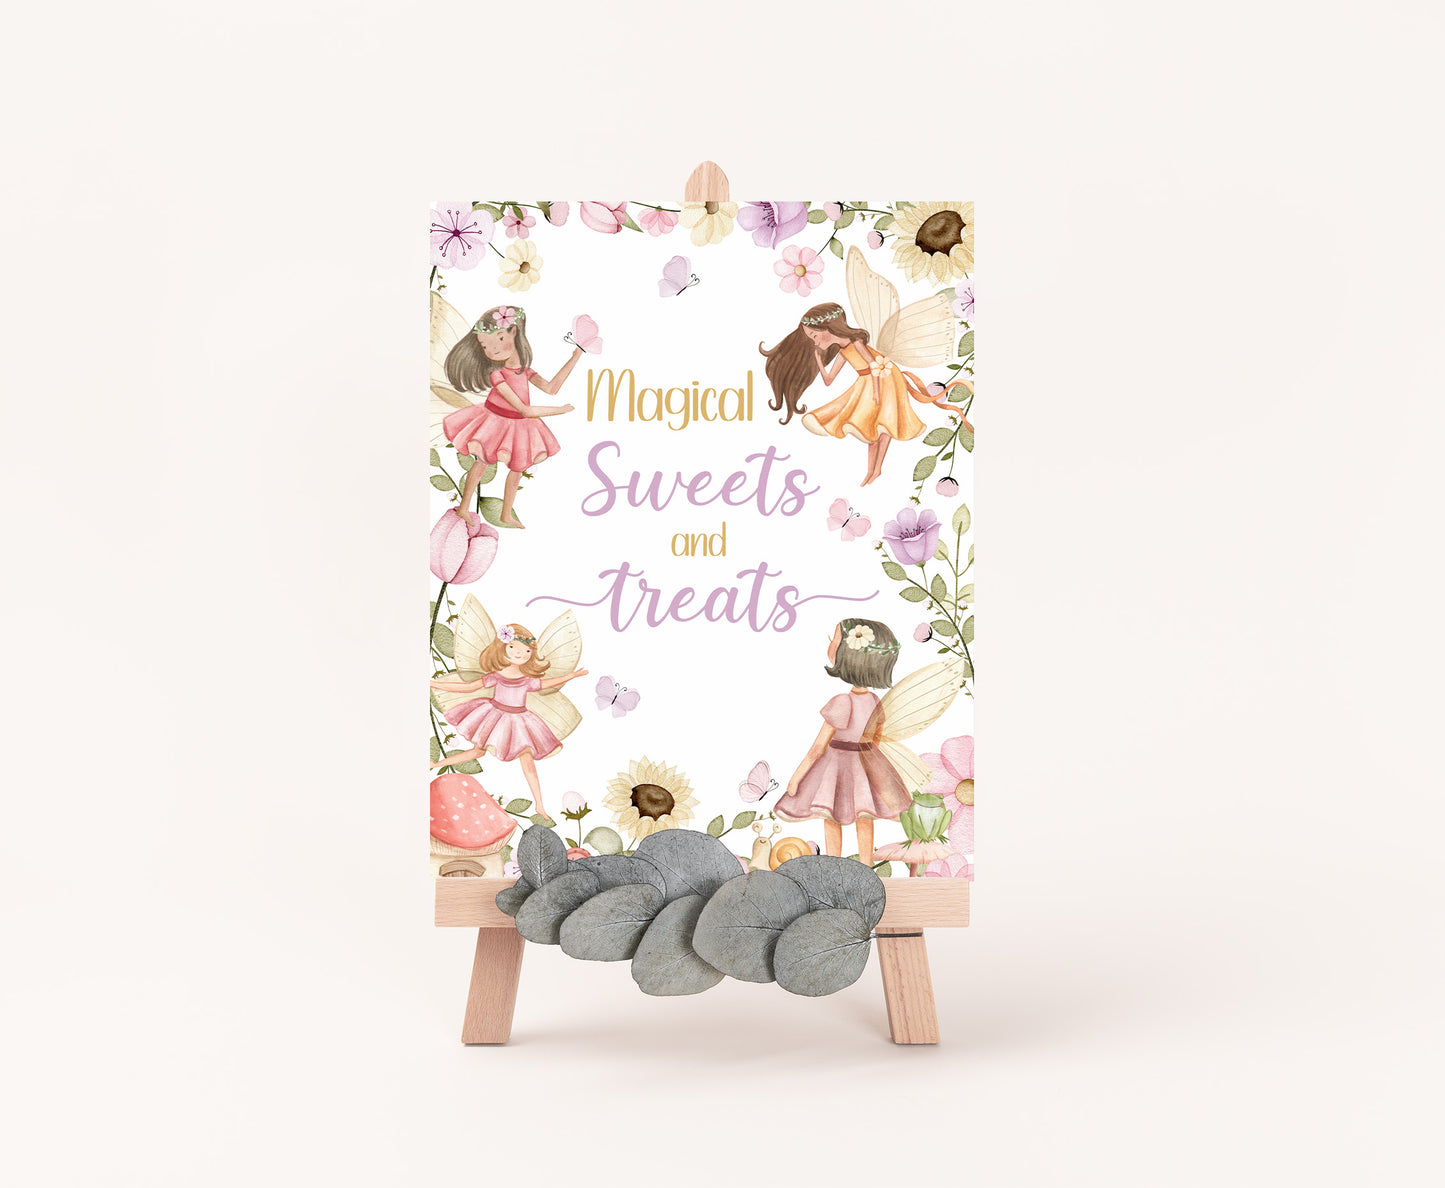 Fairy Sweets and Treats Sign | Fairy Themed Party Table Decorations - 10A